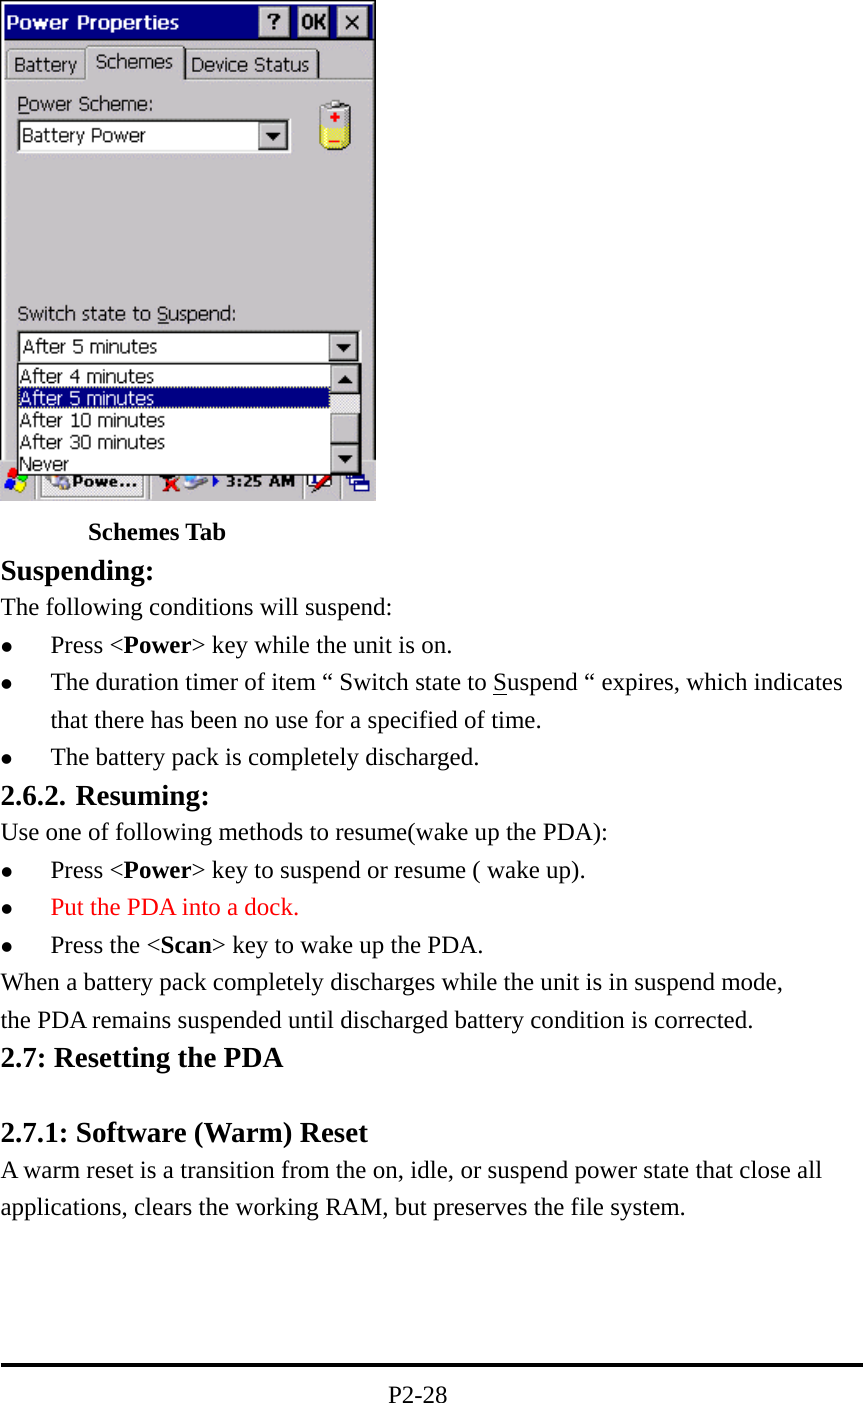         Schemes Tab Suspending: The following conditions will suspend:   Press &lt;Power&gt; key while the unit is on.   The duration timer of item “ Switch state to Suspend “ expires, which indicates that there has been no use for a specified of time.   The battery pack is completely discharged. 2.6.2. Resuming: Use one of following methods to resume(wake up the PDA):   Press &lt;Power&gt; key to suspend or resume ( wake up).   Put the PDA into a dock.   Press the &lt;Scan&gt; key to wake up the PDA. When a battery pack completely discharges while the unit is in suspend mode,                      the PDA remains suspended until discharged battery condition is corrected. 2.7: Resetting the PDA  2.7.1: Software (Warm) Reset A warm reset is a transition from the on, idle, or suspend power state that close all applications, clears the working RAM, but preserves the file system.     P2-28 